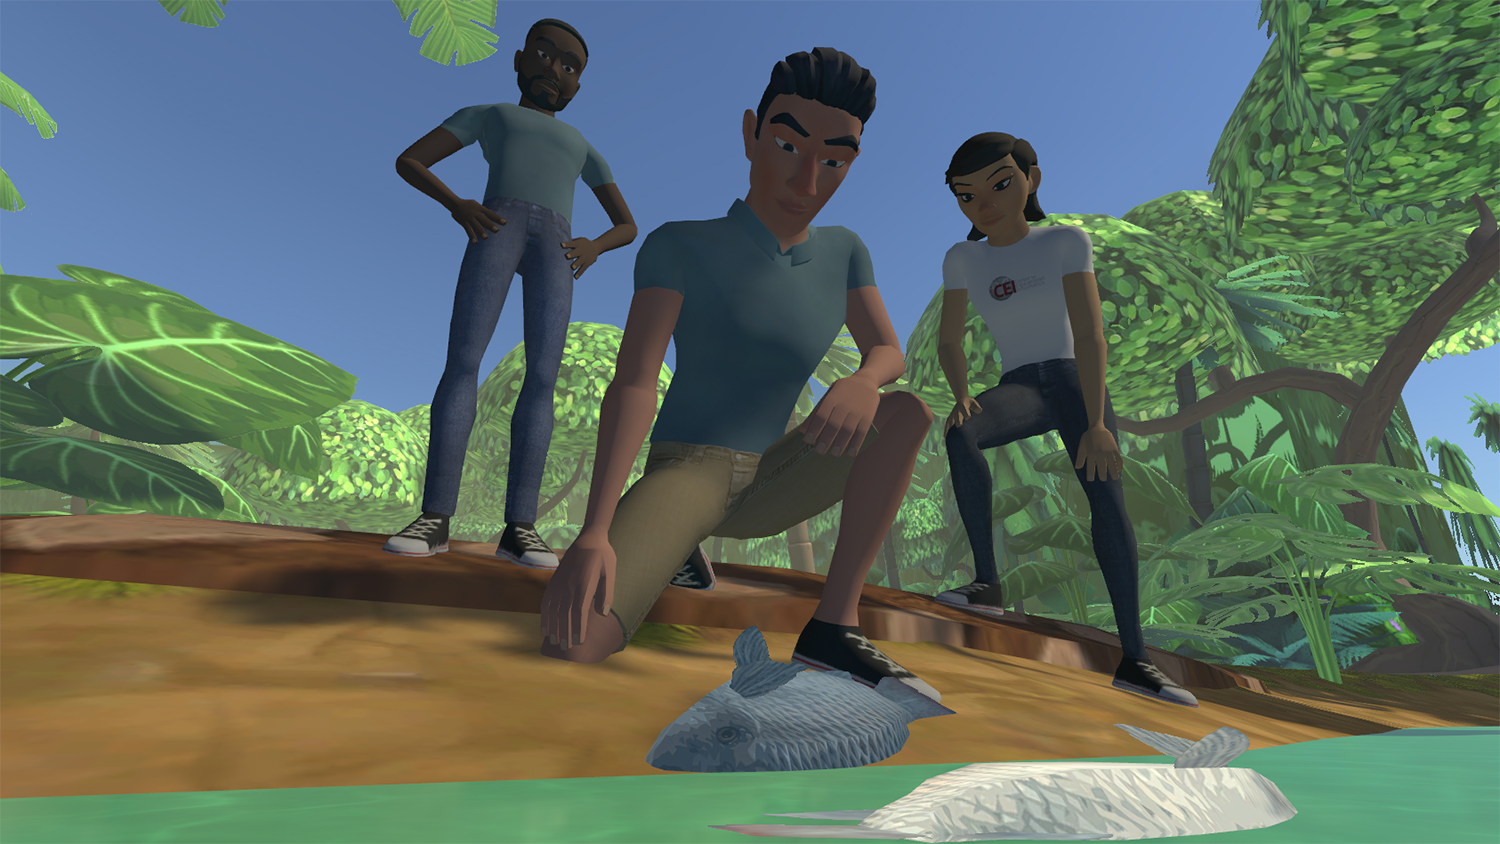 video game image of three young people examining a waterway